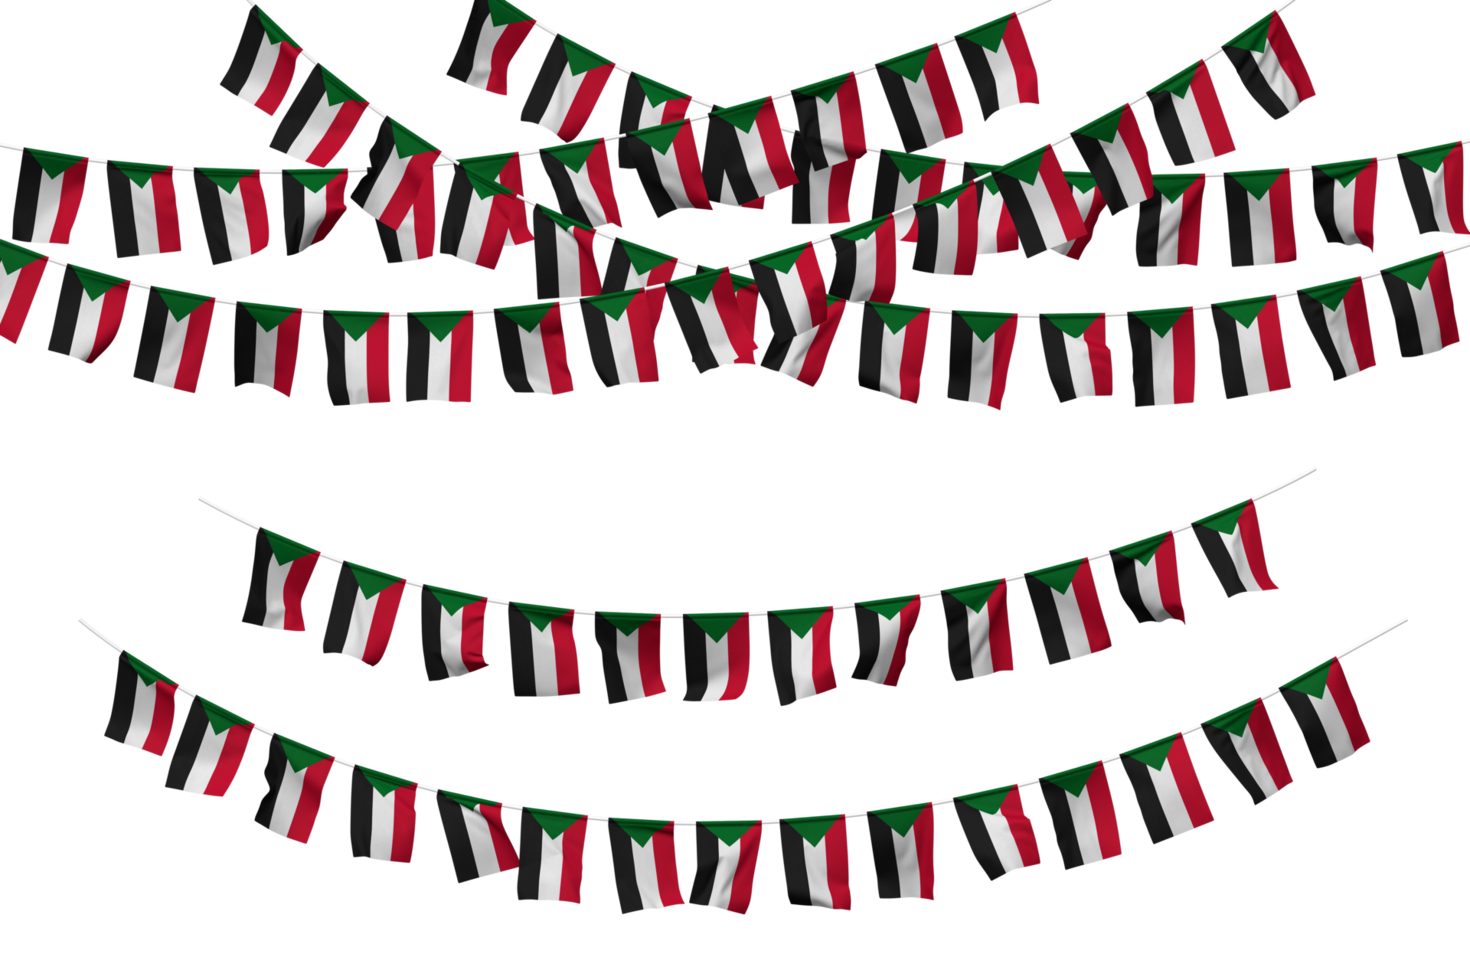 Sudan Flag Bunting Decoration on The Rope, Jhandi, Set of Small Flag Celebration, 3D Rendering png